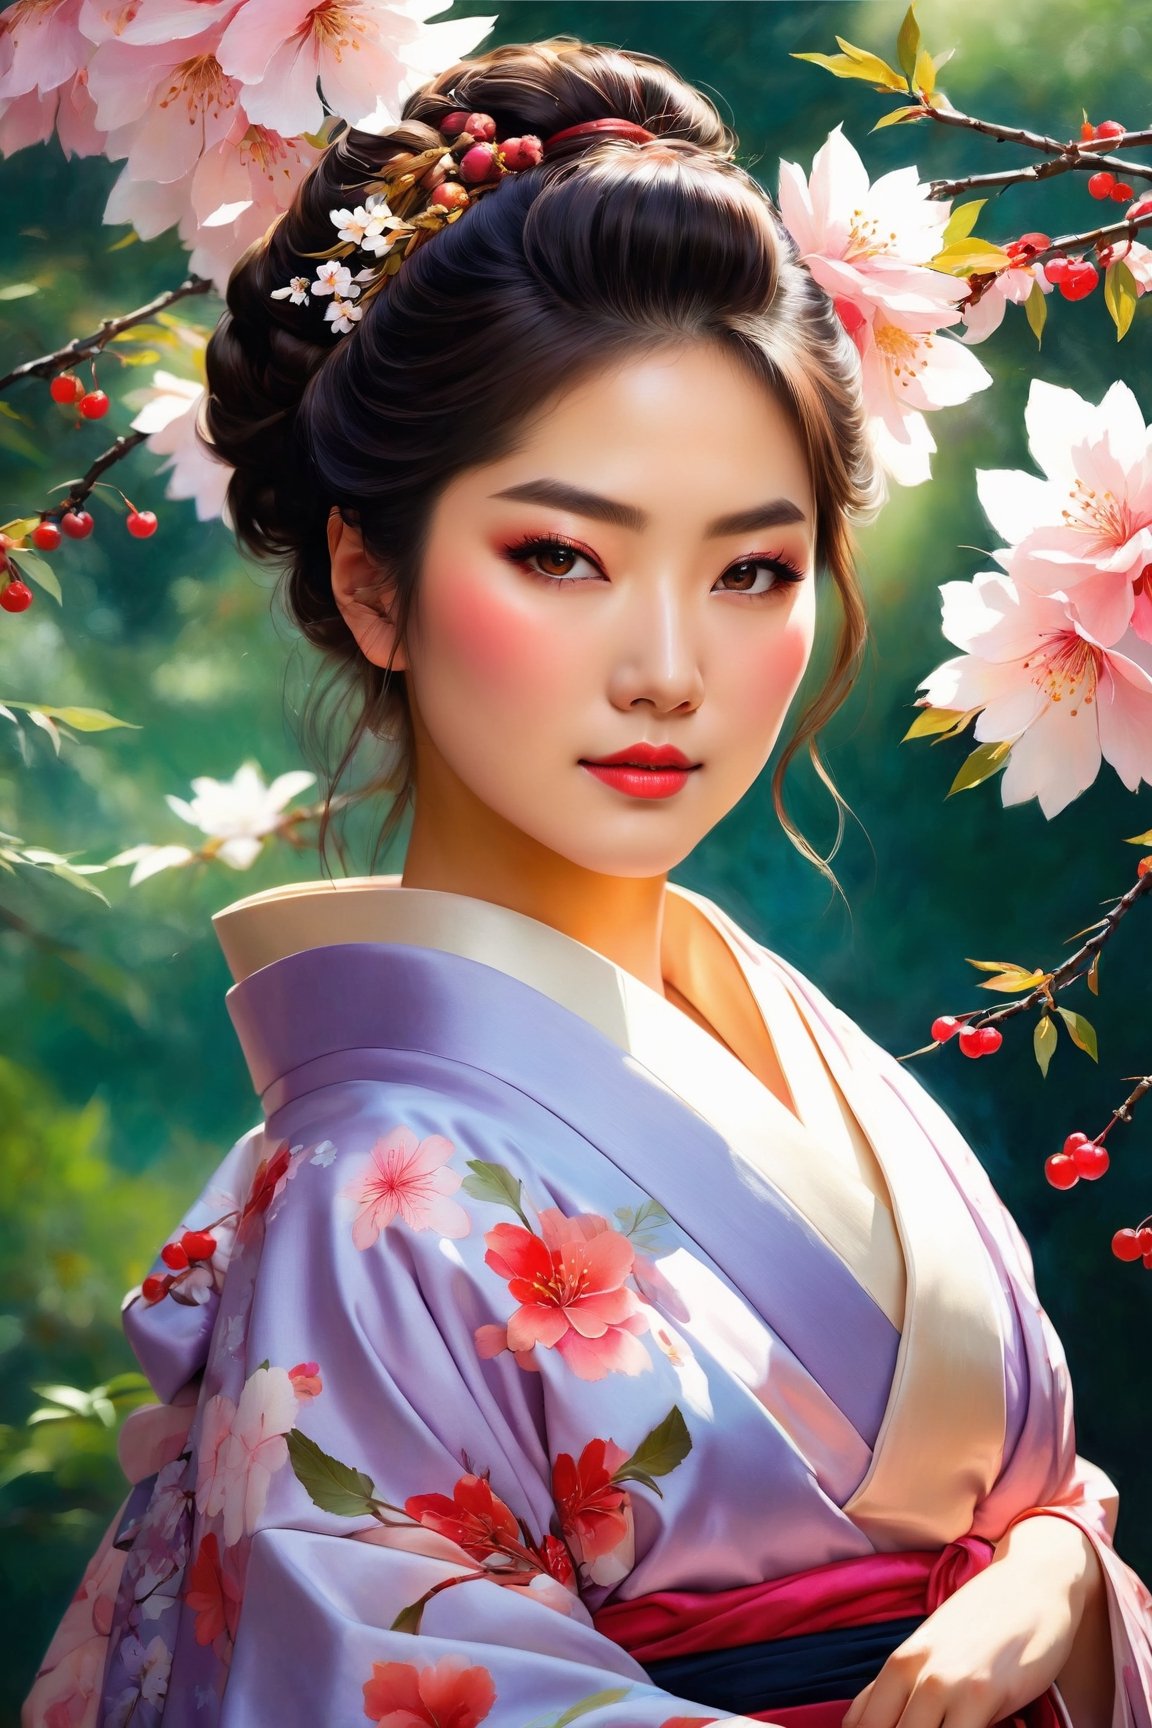 (young adult, beautiful, seductive, alluring), (Akita bijin), (best quality, highres, ultra-detailed), (oil painting, fine art), (vibrant colors, warm tones), (soft lighting, dramatic shadows), (deep gaze, captivating eyes), (rosy lips, luscious mouth), (porcelain skin, flawless complexion), ( A slightly slender face with  cherry-blossom-colored cheeks). (Almond-shaped eyes and a  shapely nose). (elegant kimono, revealing neckline), (attractive pose, confident stance), (lush garden background, blooming flowers), (subtle breeze, swaying leaves), (romantic atmosphere, dreamy ambiance), (sensual expression, subtle smile)